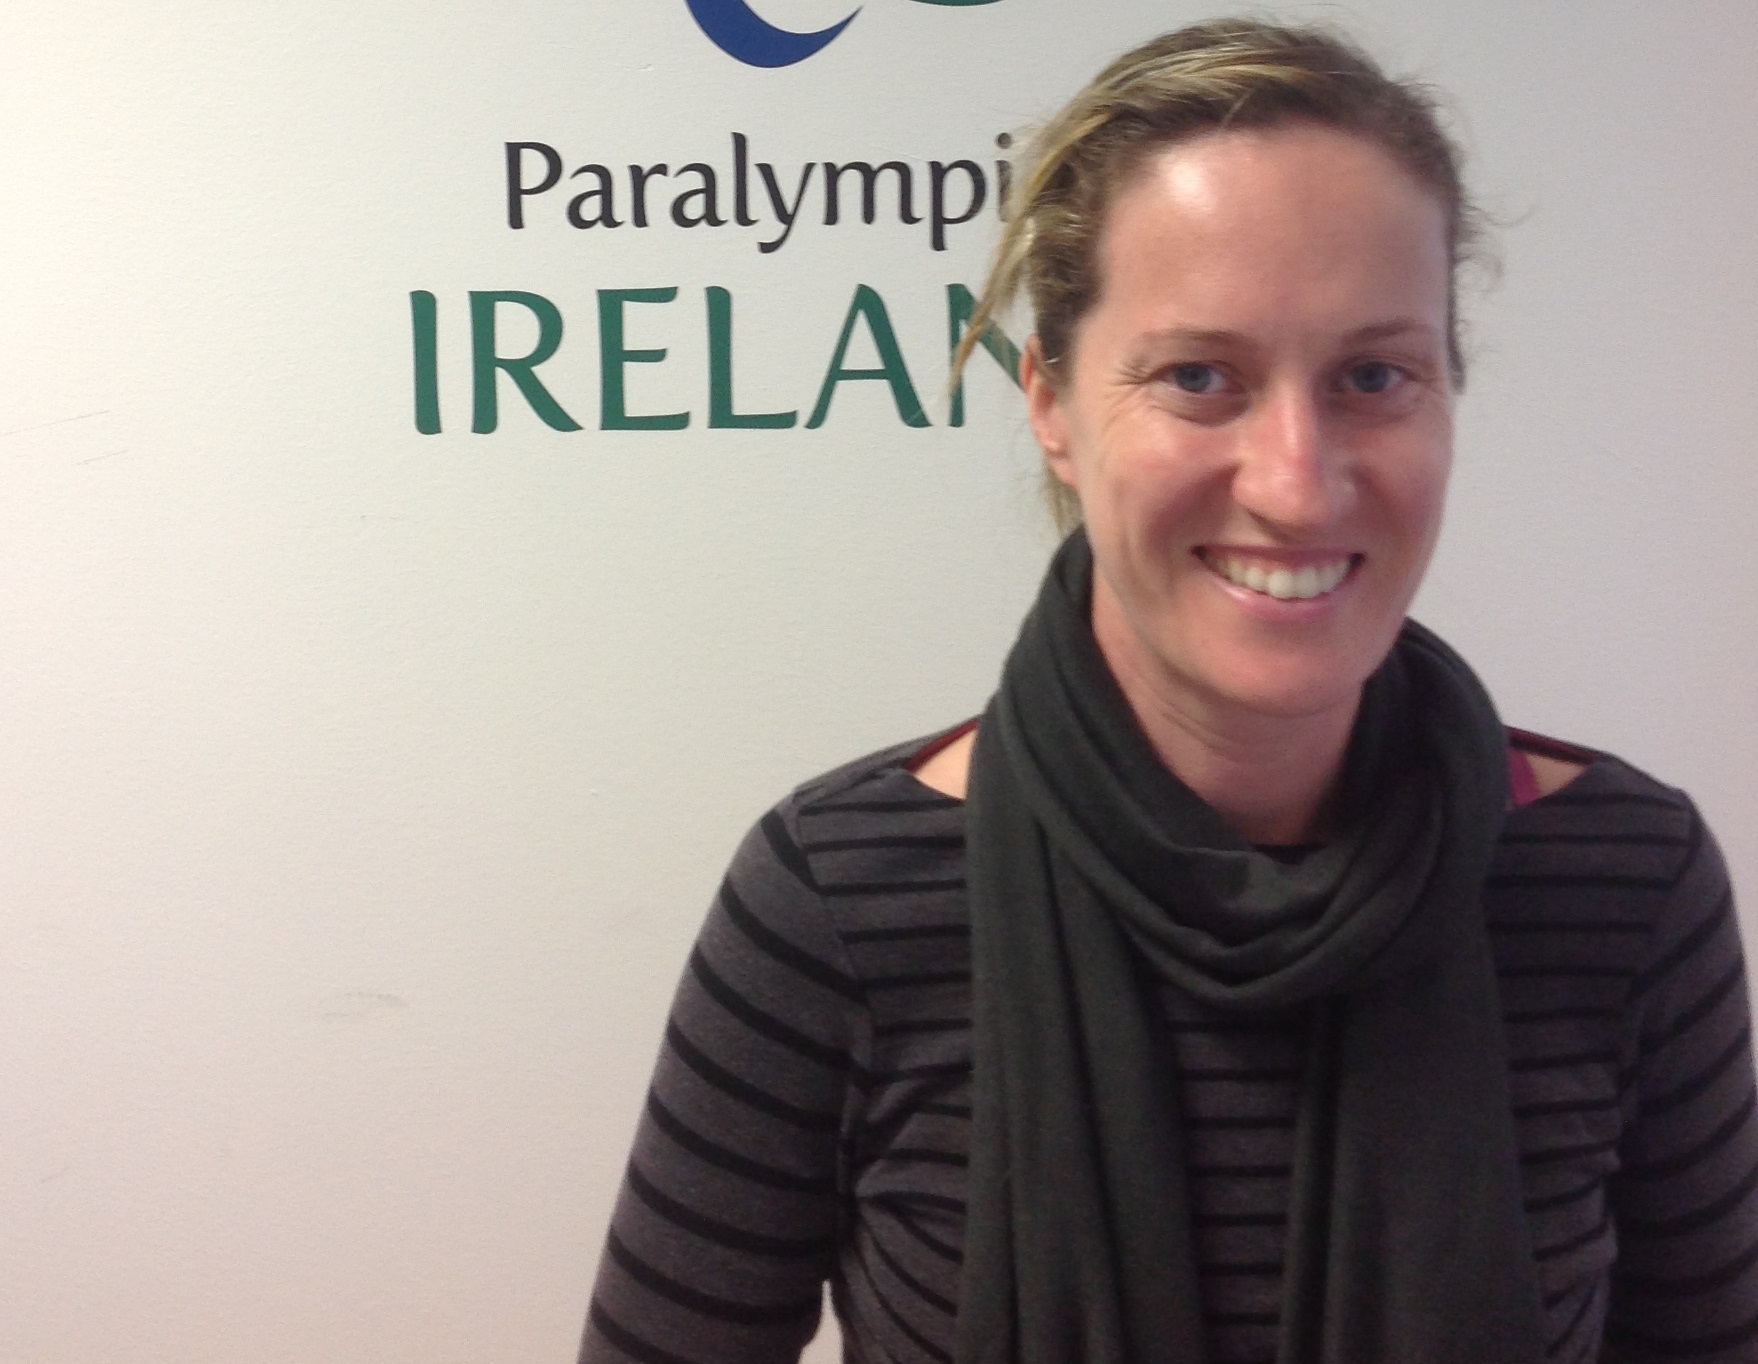 Fiona Murray has been appointed as the new Performance Assistant of Paralympics Ireland